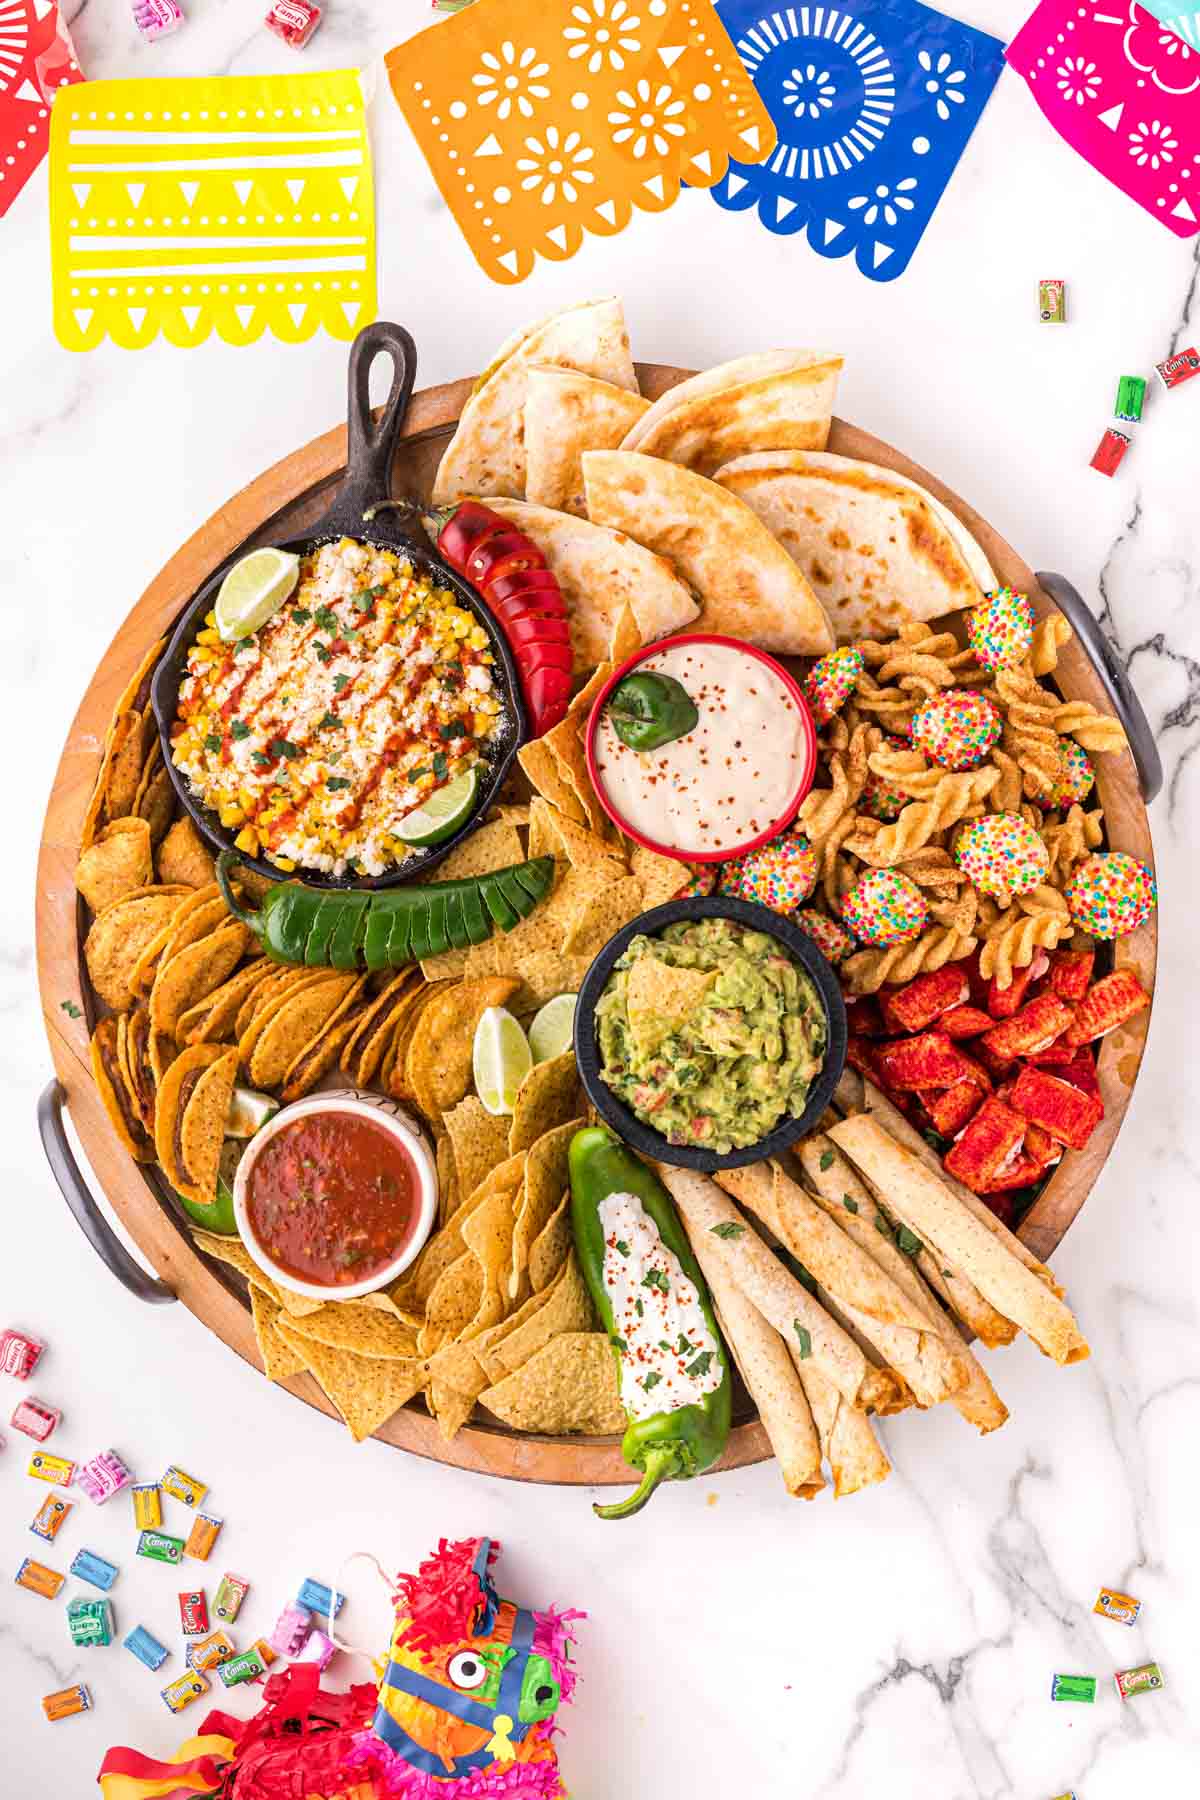 A Mexican charcuterie board with taquitos, tacos, elote, guacamole, and other treats.